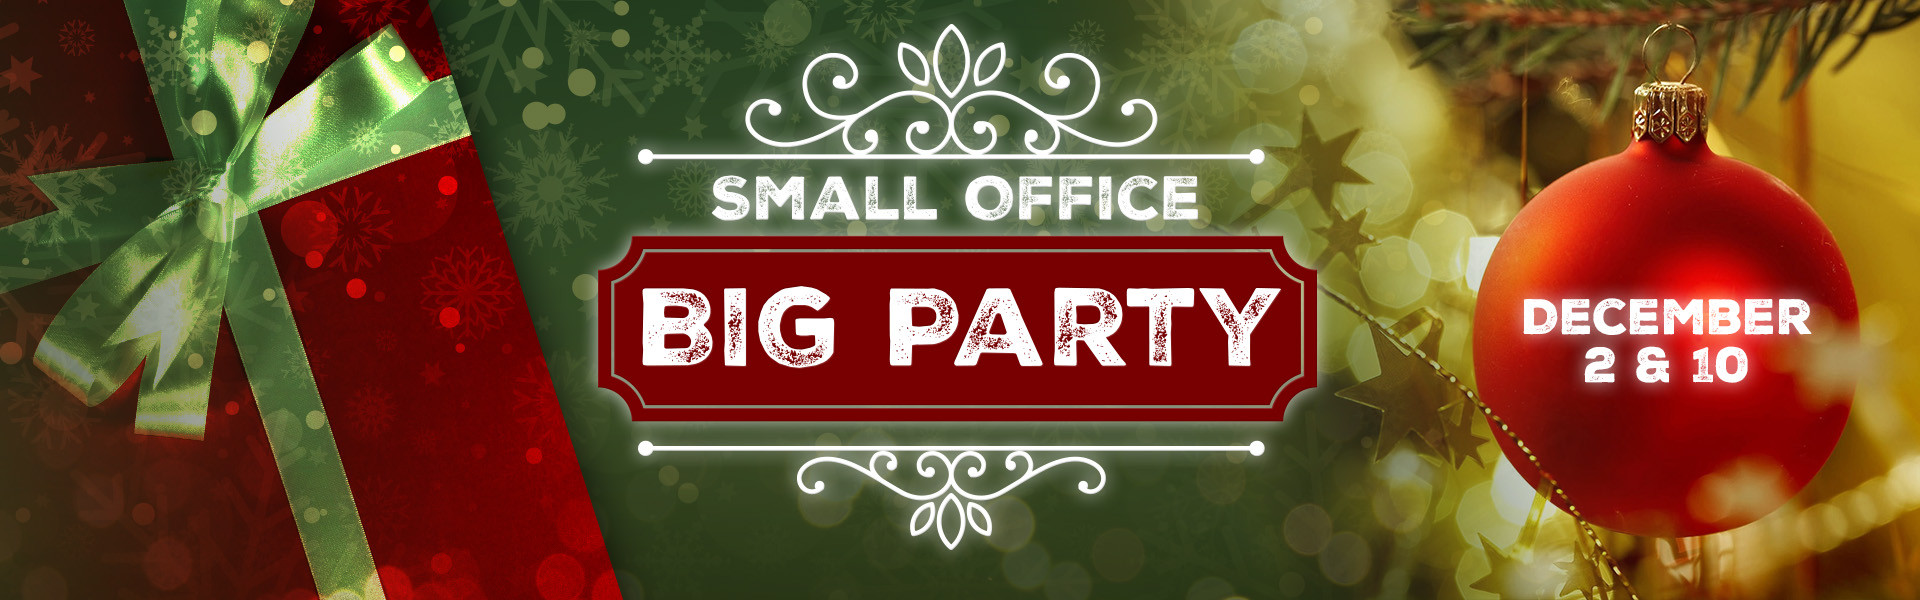 Small Office Christmas Party Ideas
 Special Events Events Calendar